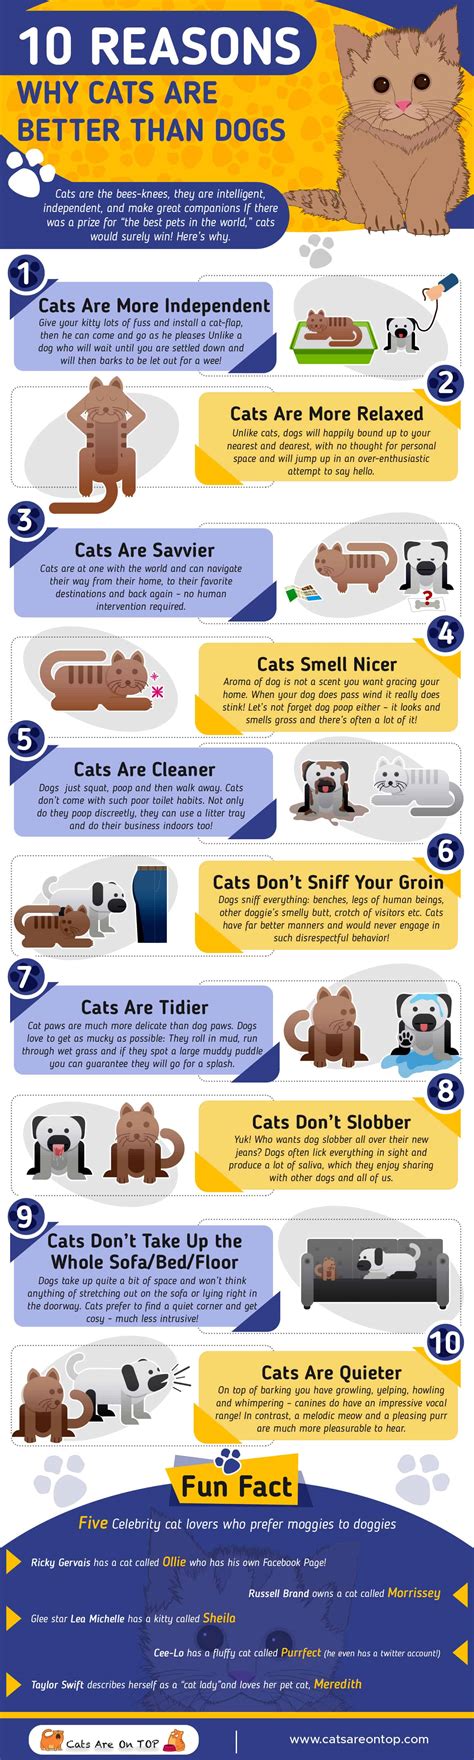 10 Reasons Why Are Dogs Better Than Cats